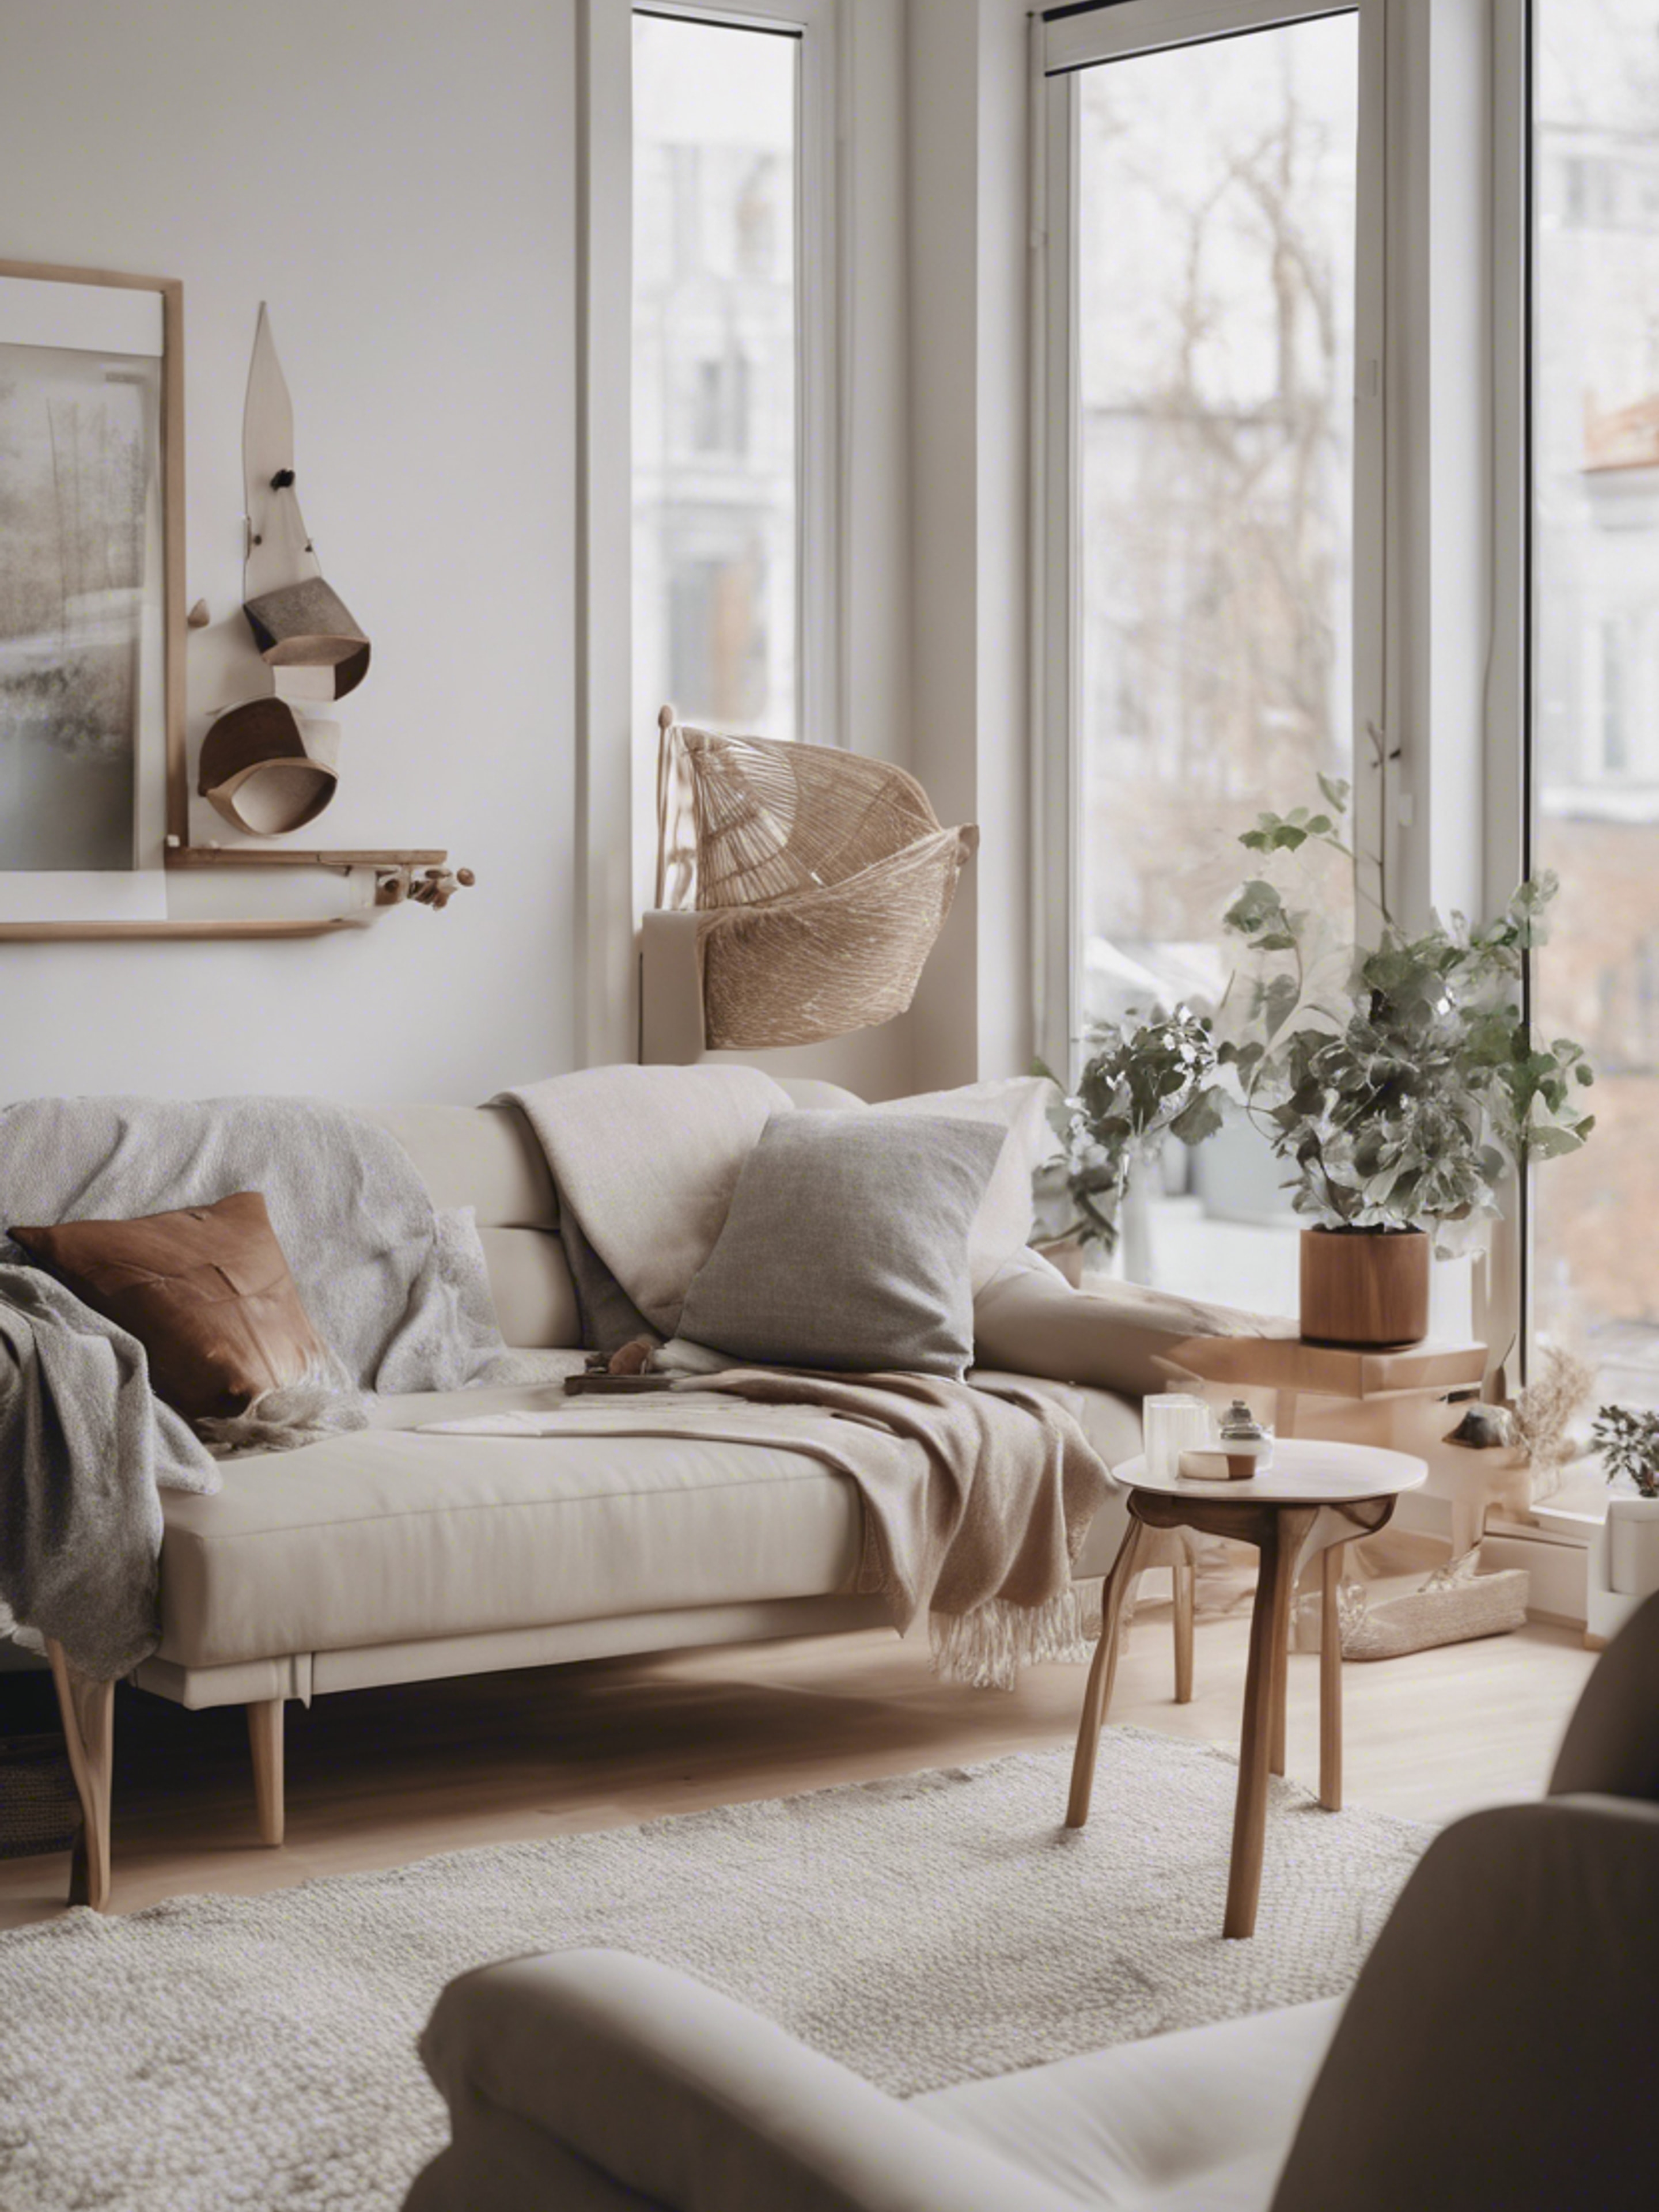 A Nordic-styled apartment with minimalist design, neutral color palette, and cozy accents. Tapet[7cbaae500de44ae0bb2d]